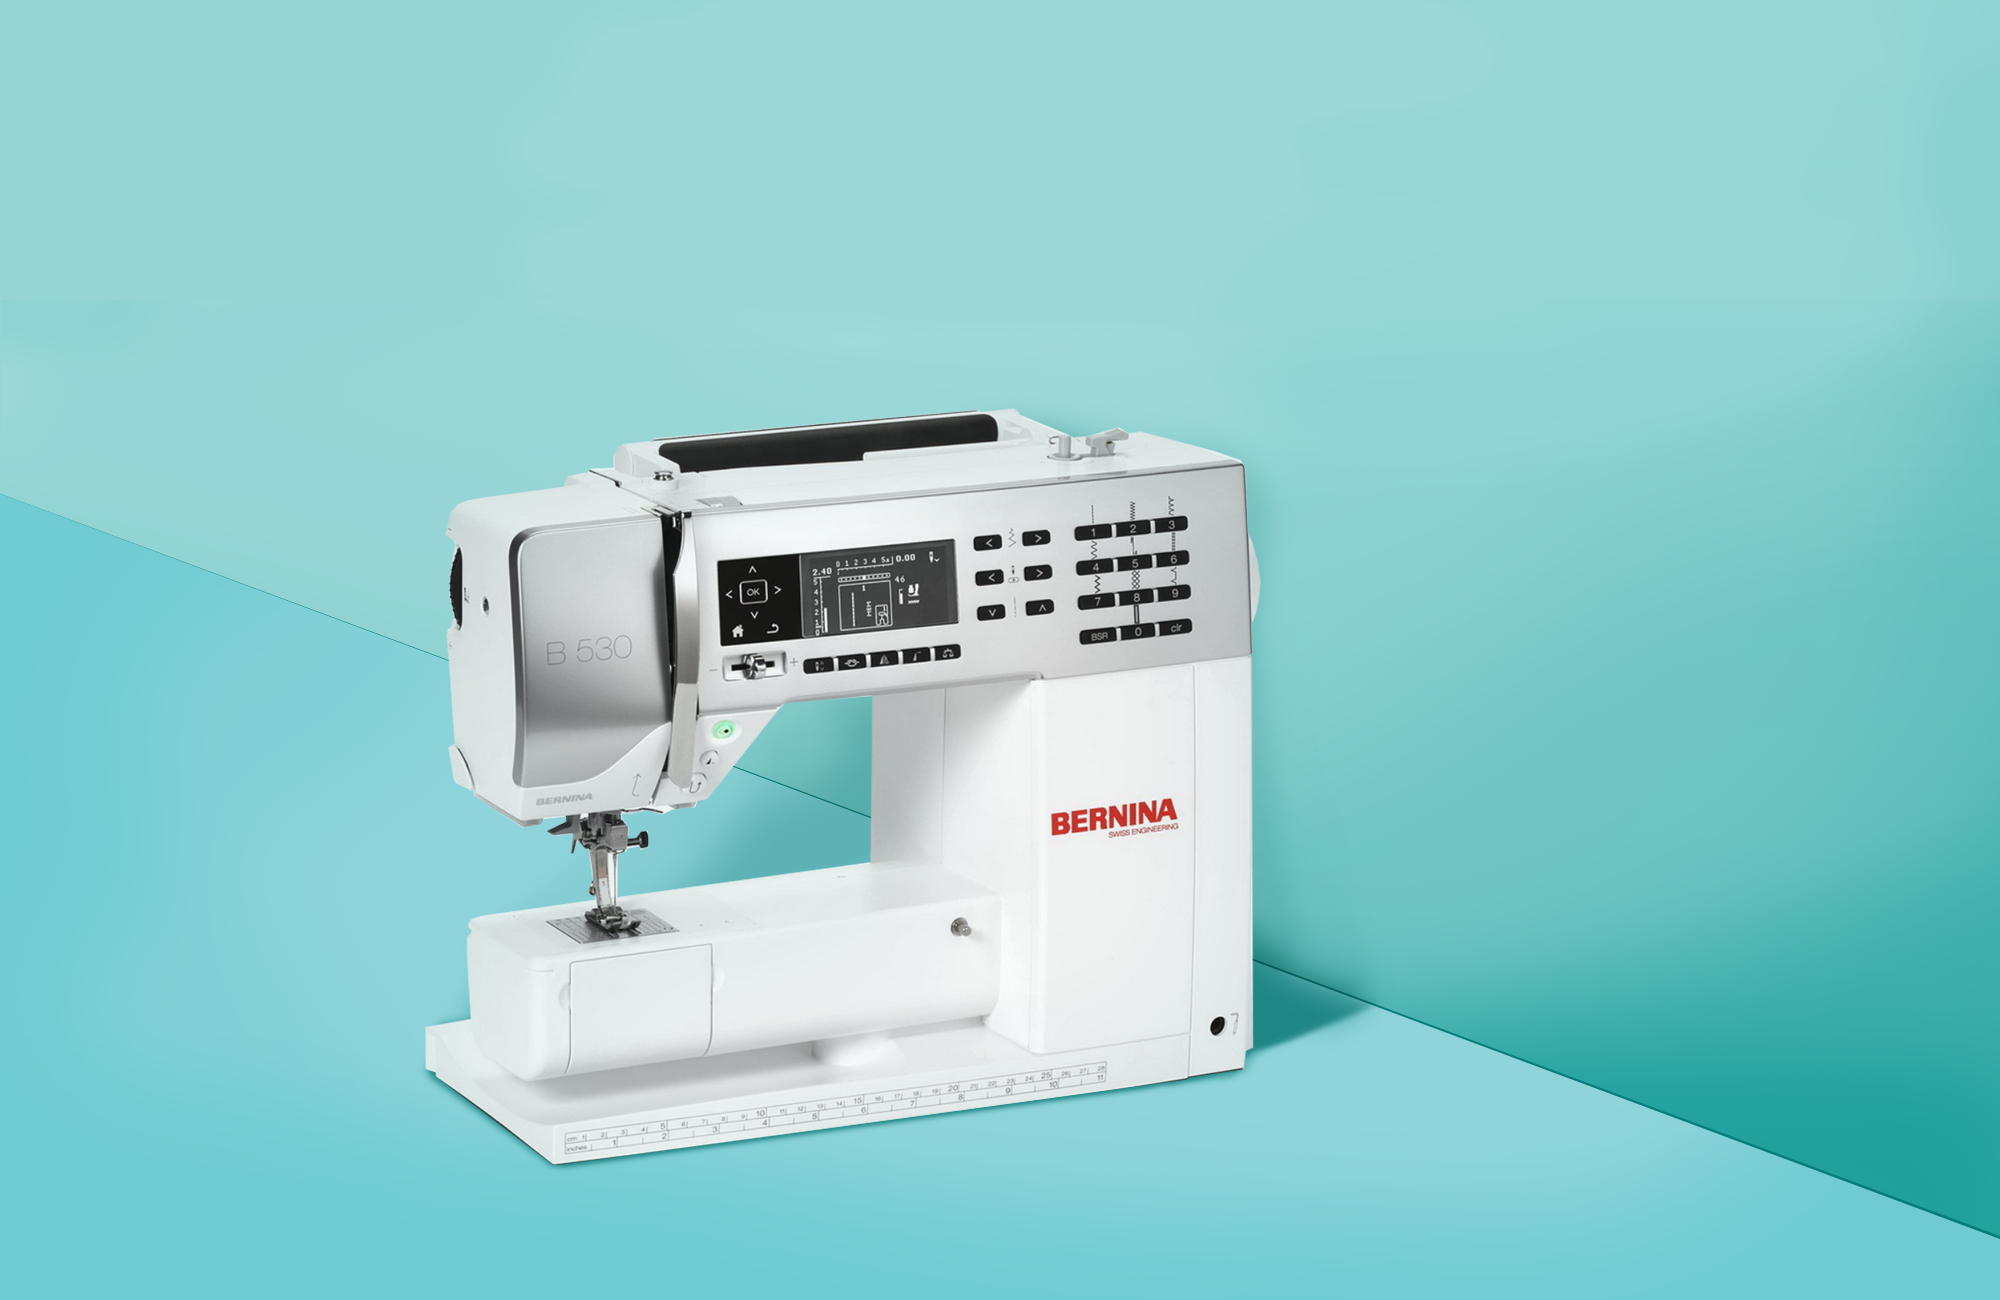 Finest Sewing Machine For Beginners For Sewing Face Masks